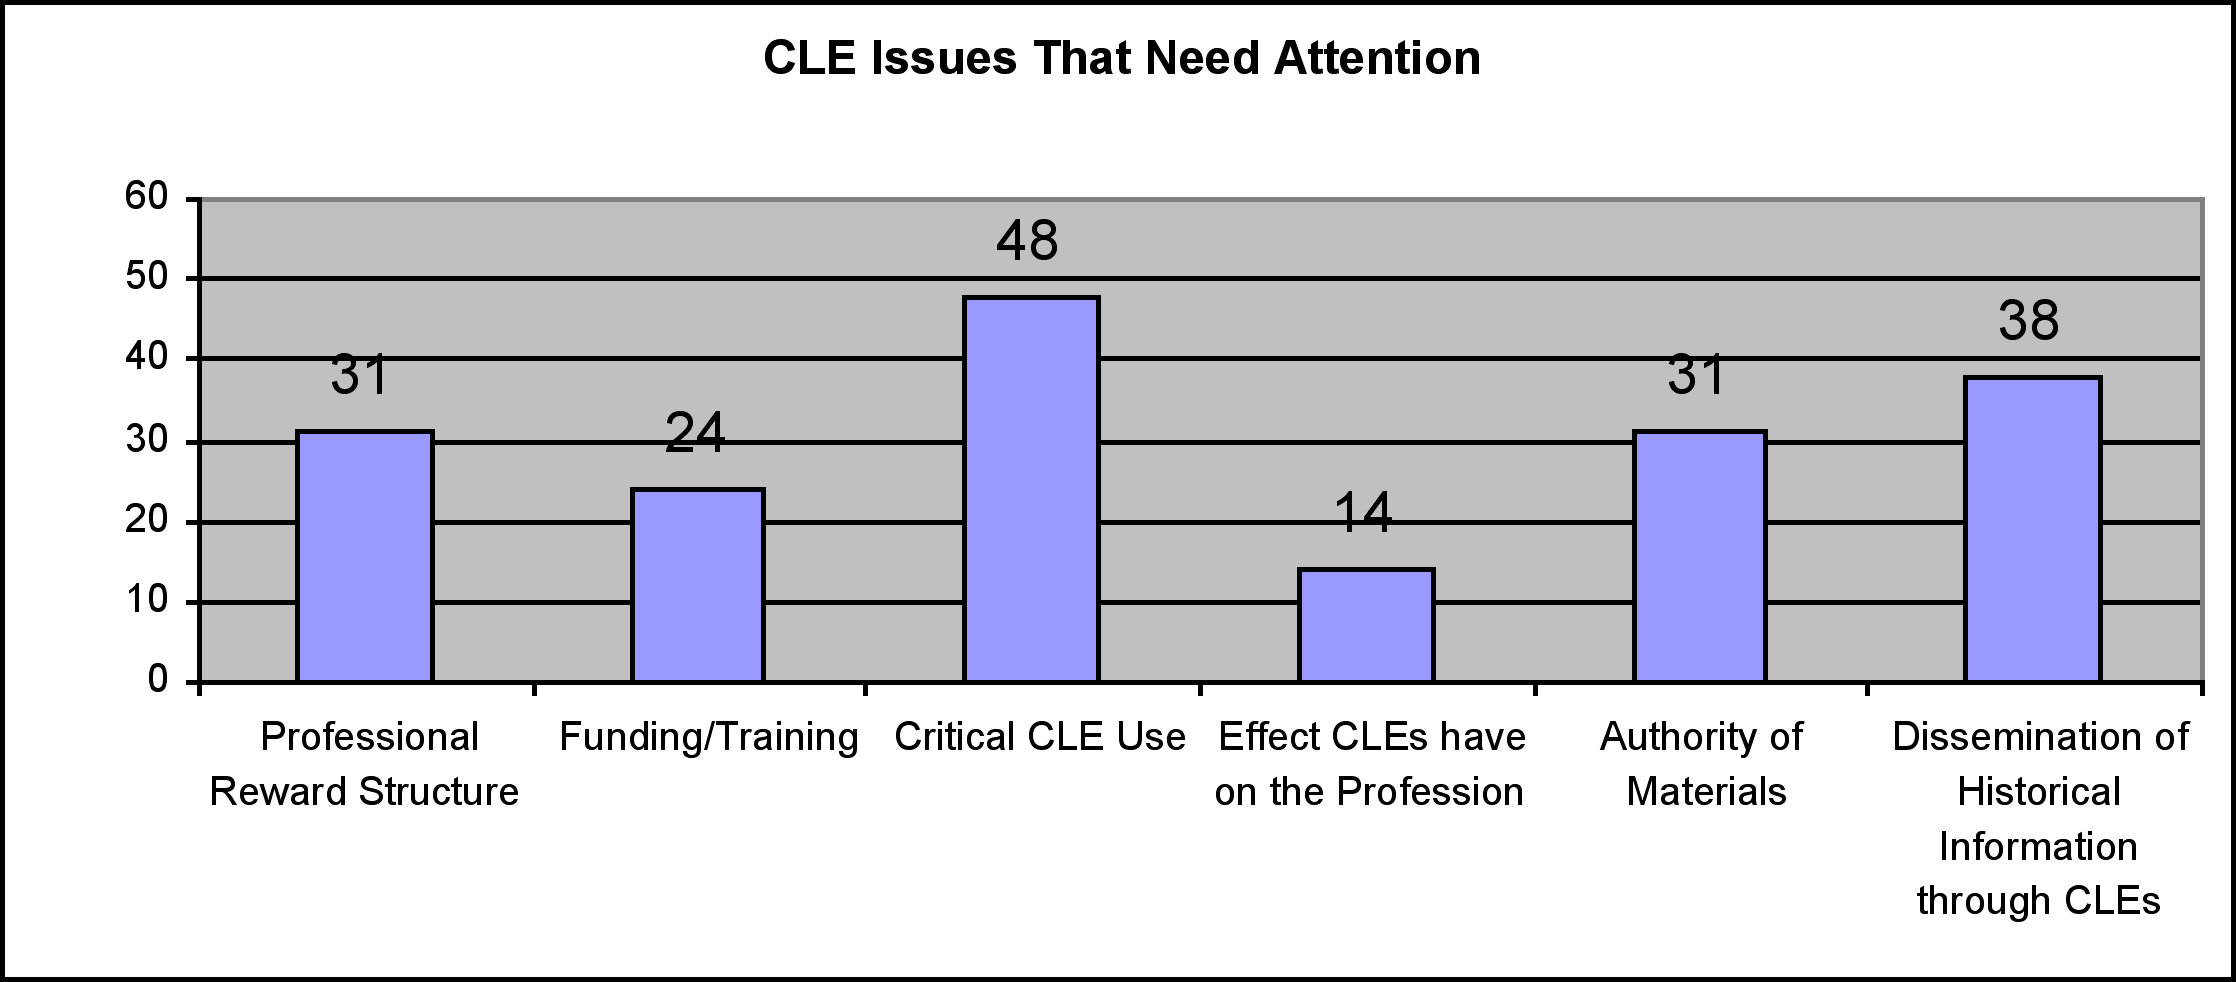 CLE Issues That Need Attention